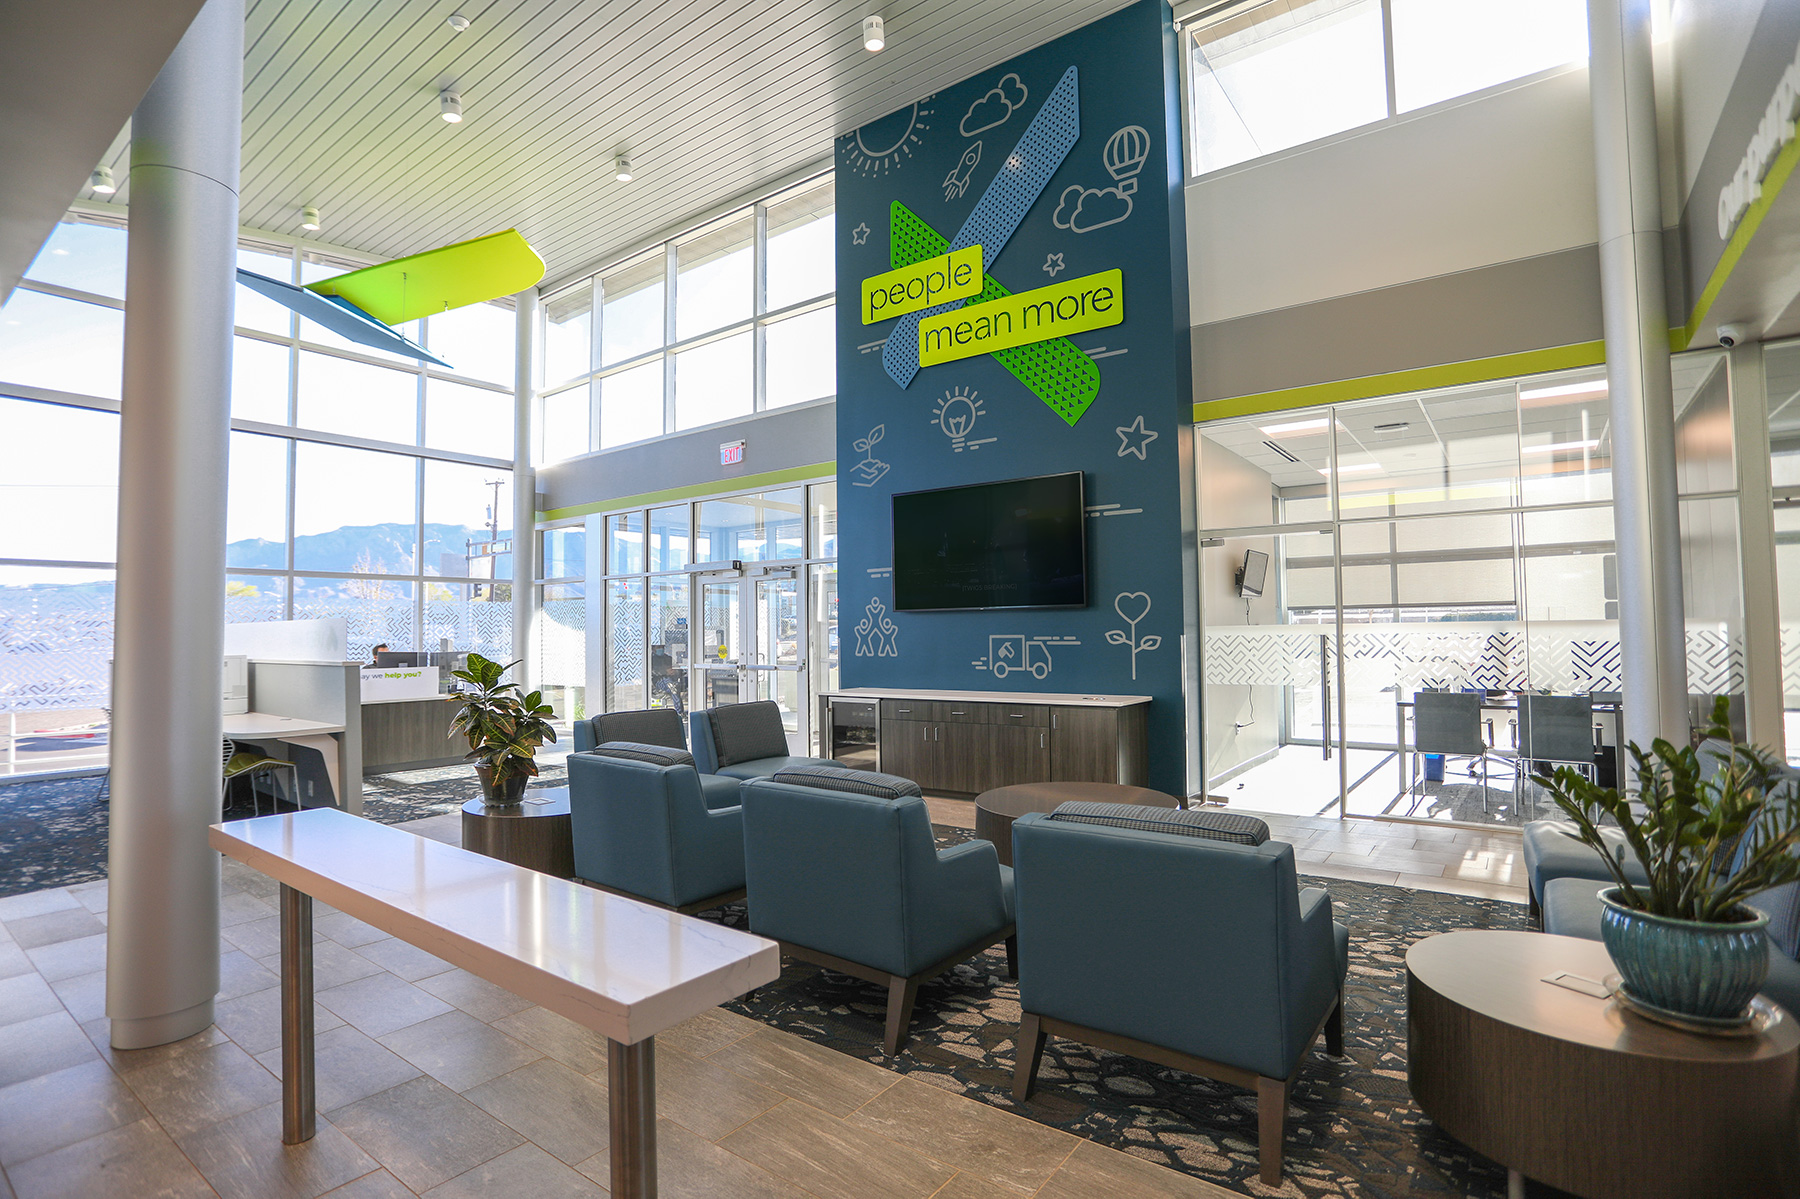 Surface-mounted downlights on a credit union lobby’s high ceiling provide lighting while reducing screen glare to encourage the use of technology.